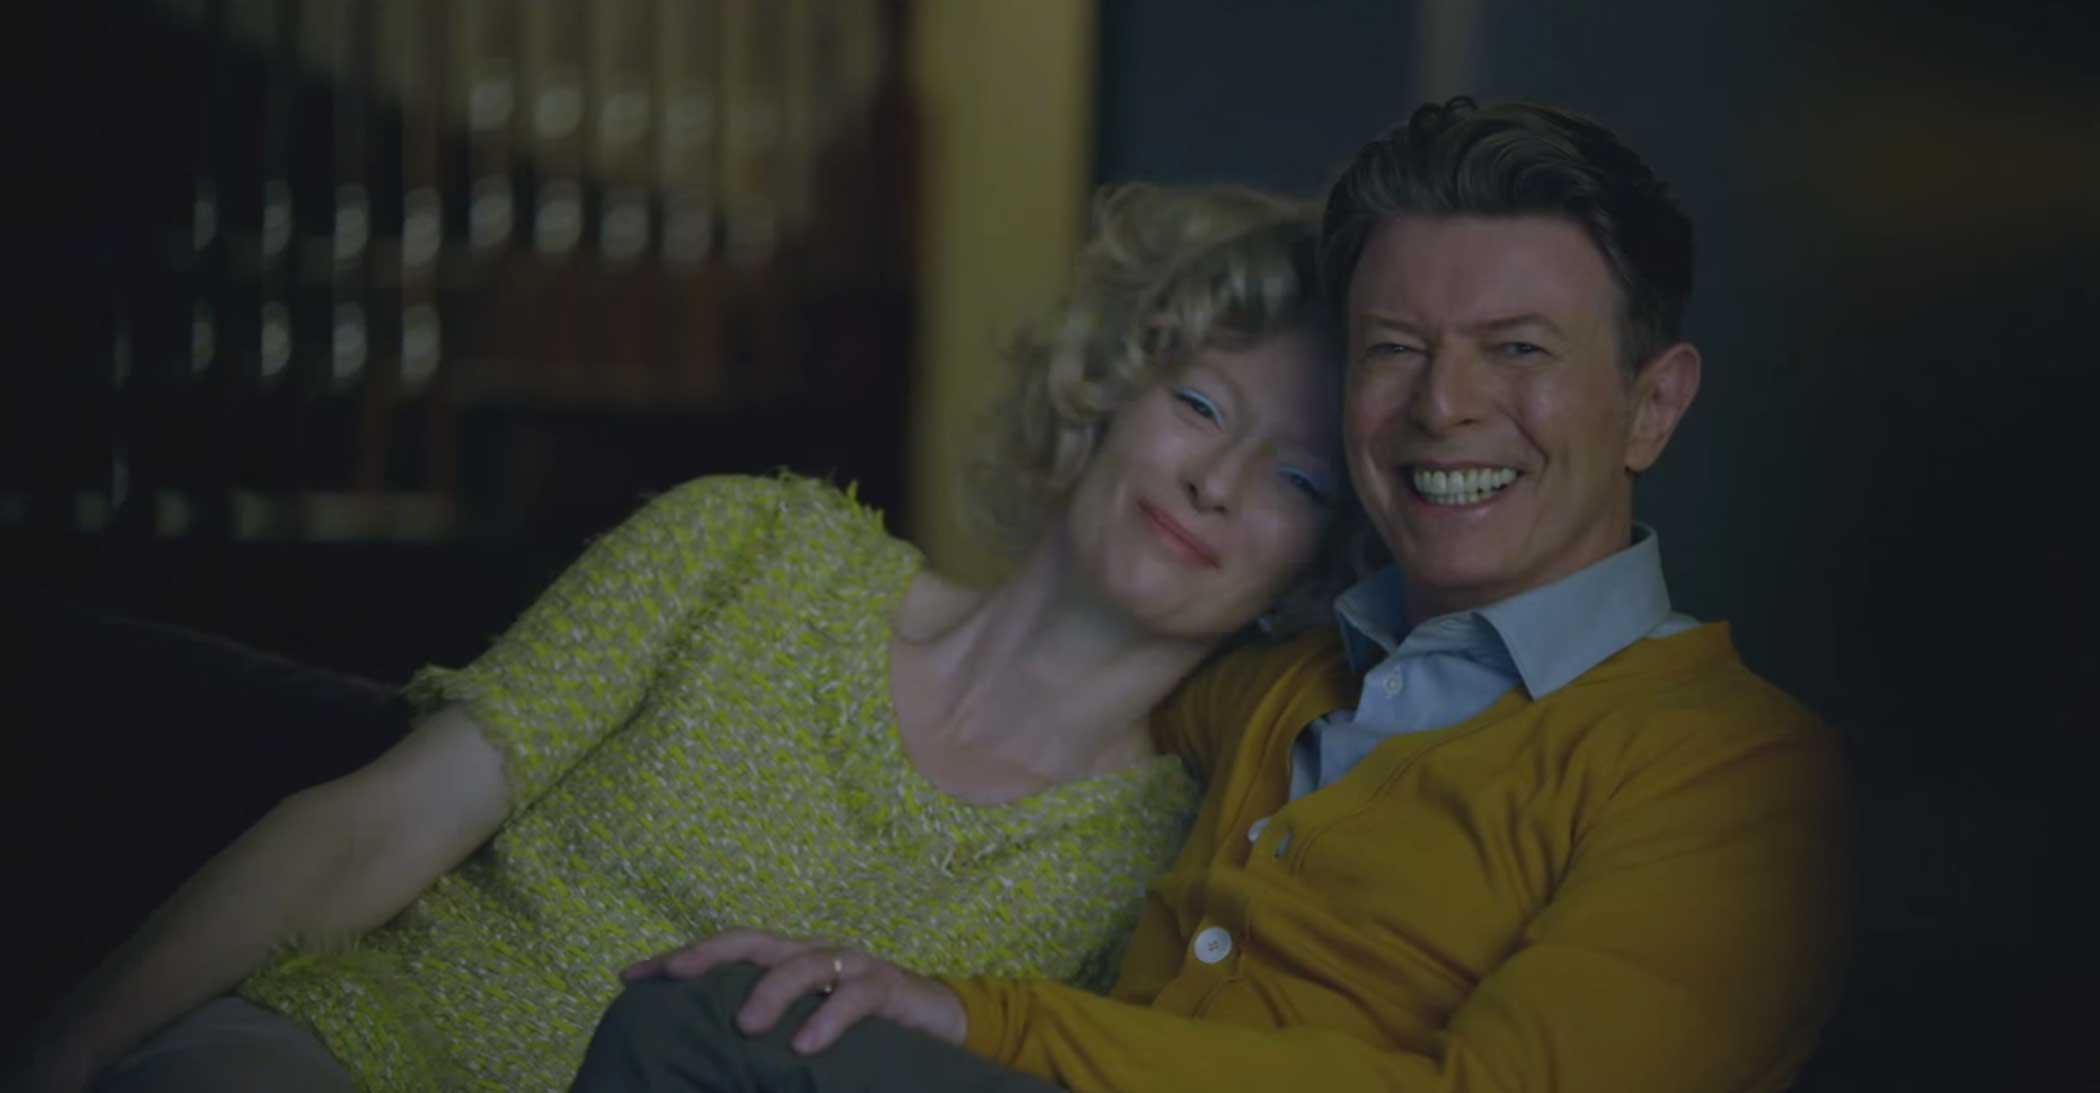 Tilda Swinton and David Bowie are pictured in a still from Bowie's video for "The Stars (Are Out Tonight)."